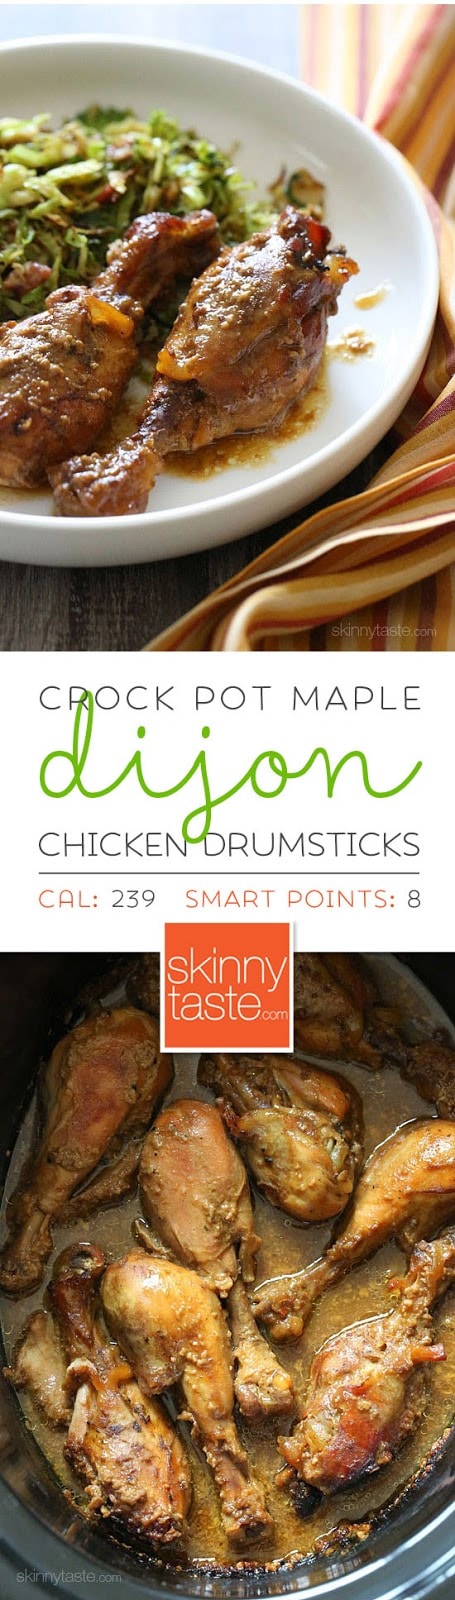 Crock Pot Maple Dijon Chicken Drumsticks – An EASY 6-ingredient chicken dish the whole family will LOVE!